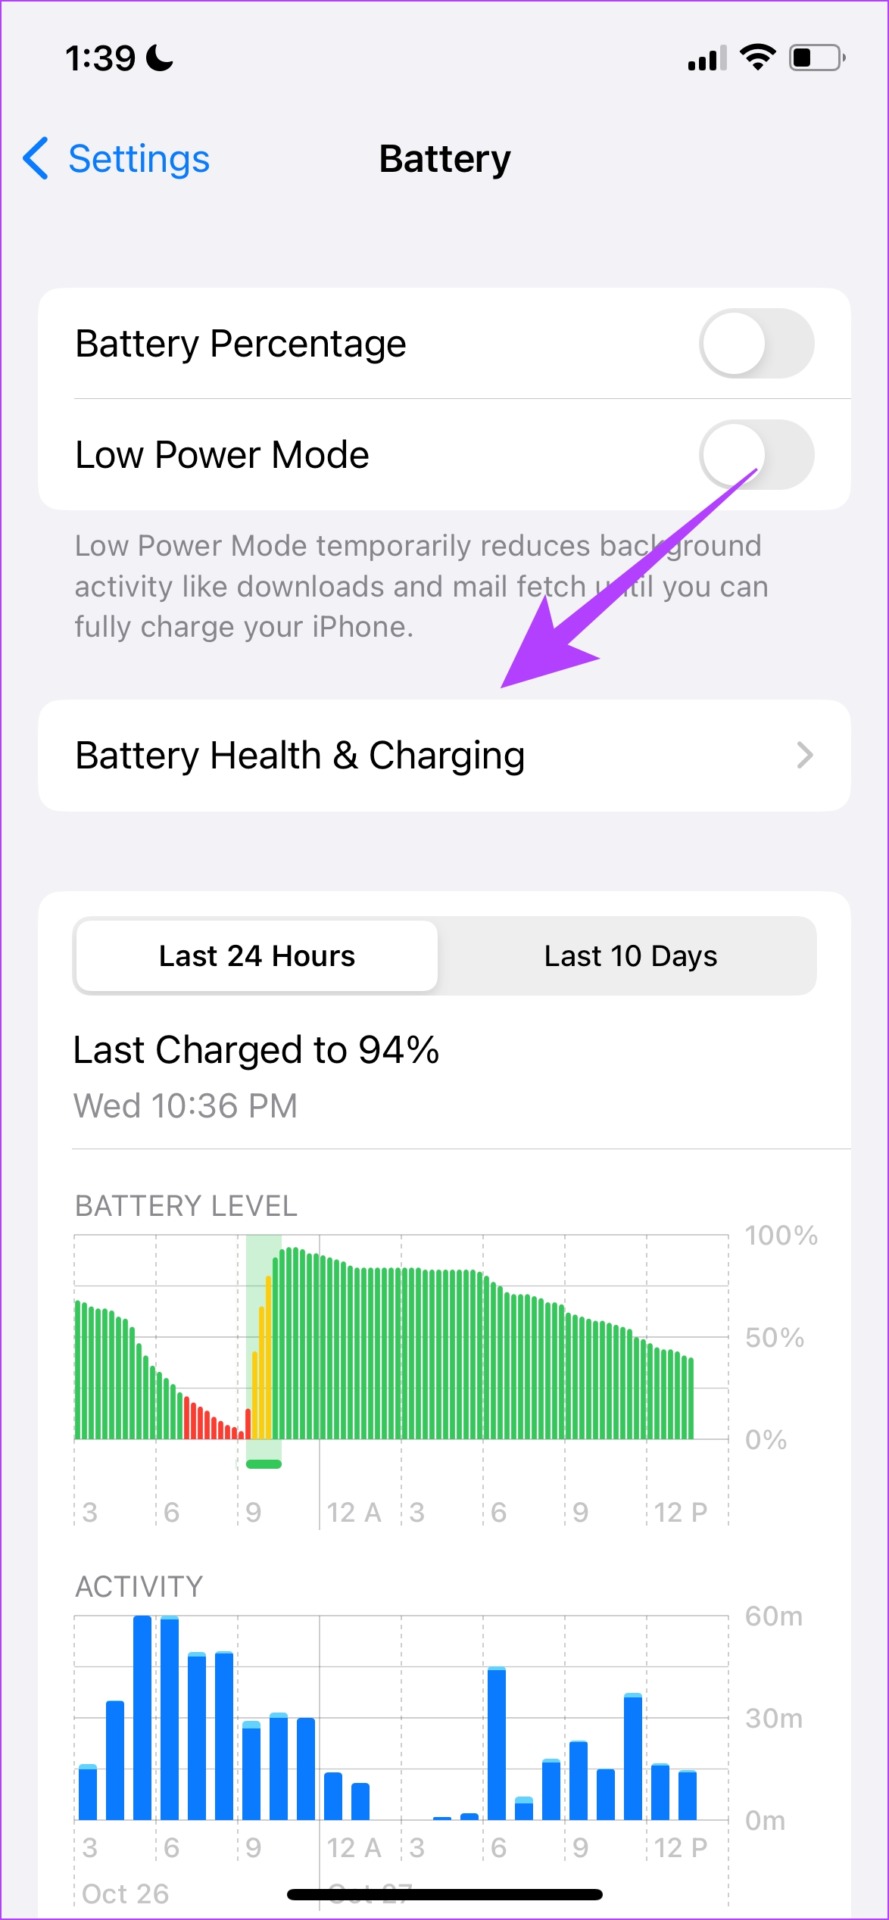 Battery health and charging